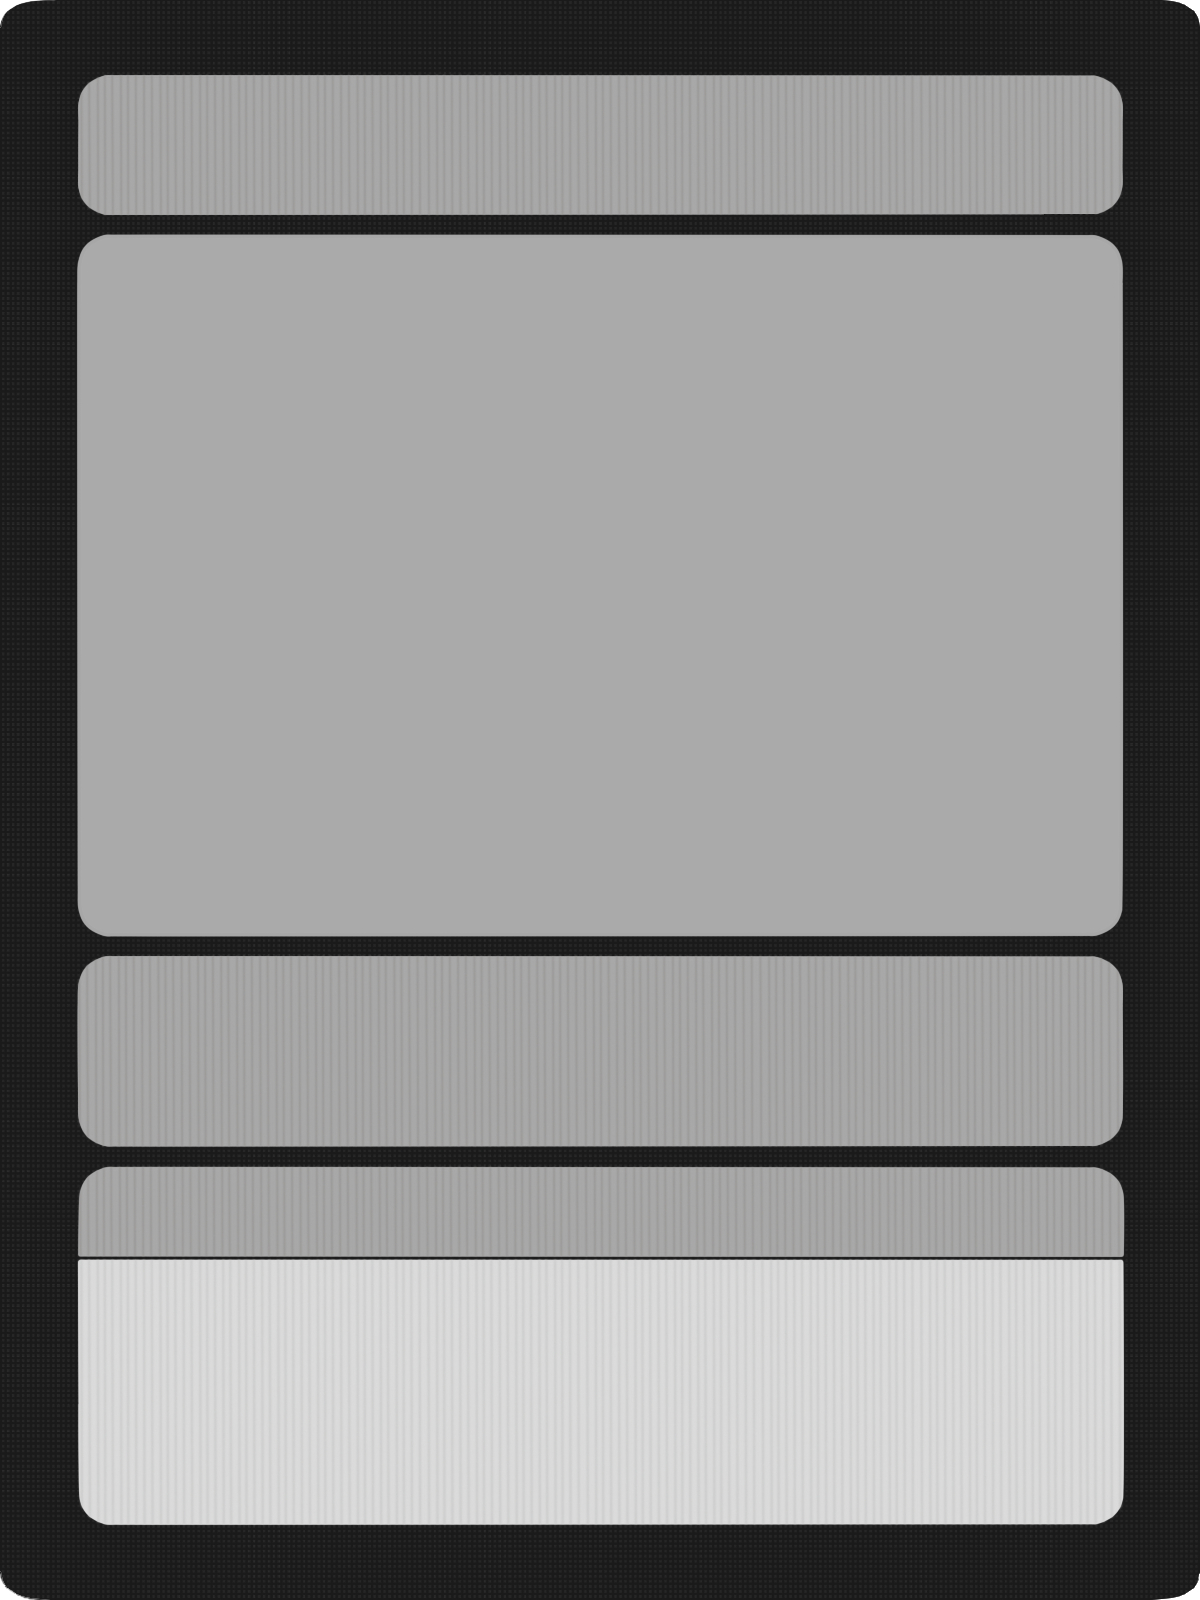 This Is A Free To Use Template For Those Wishing Throughout Blank Magic Card Template